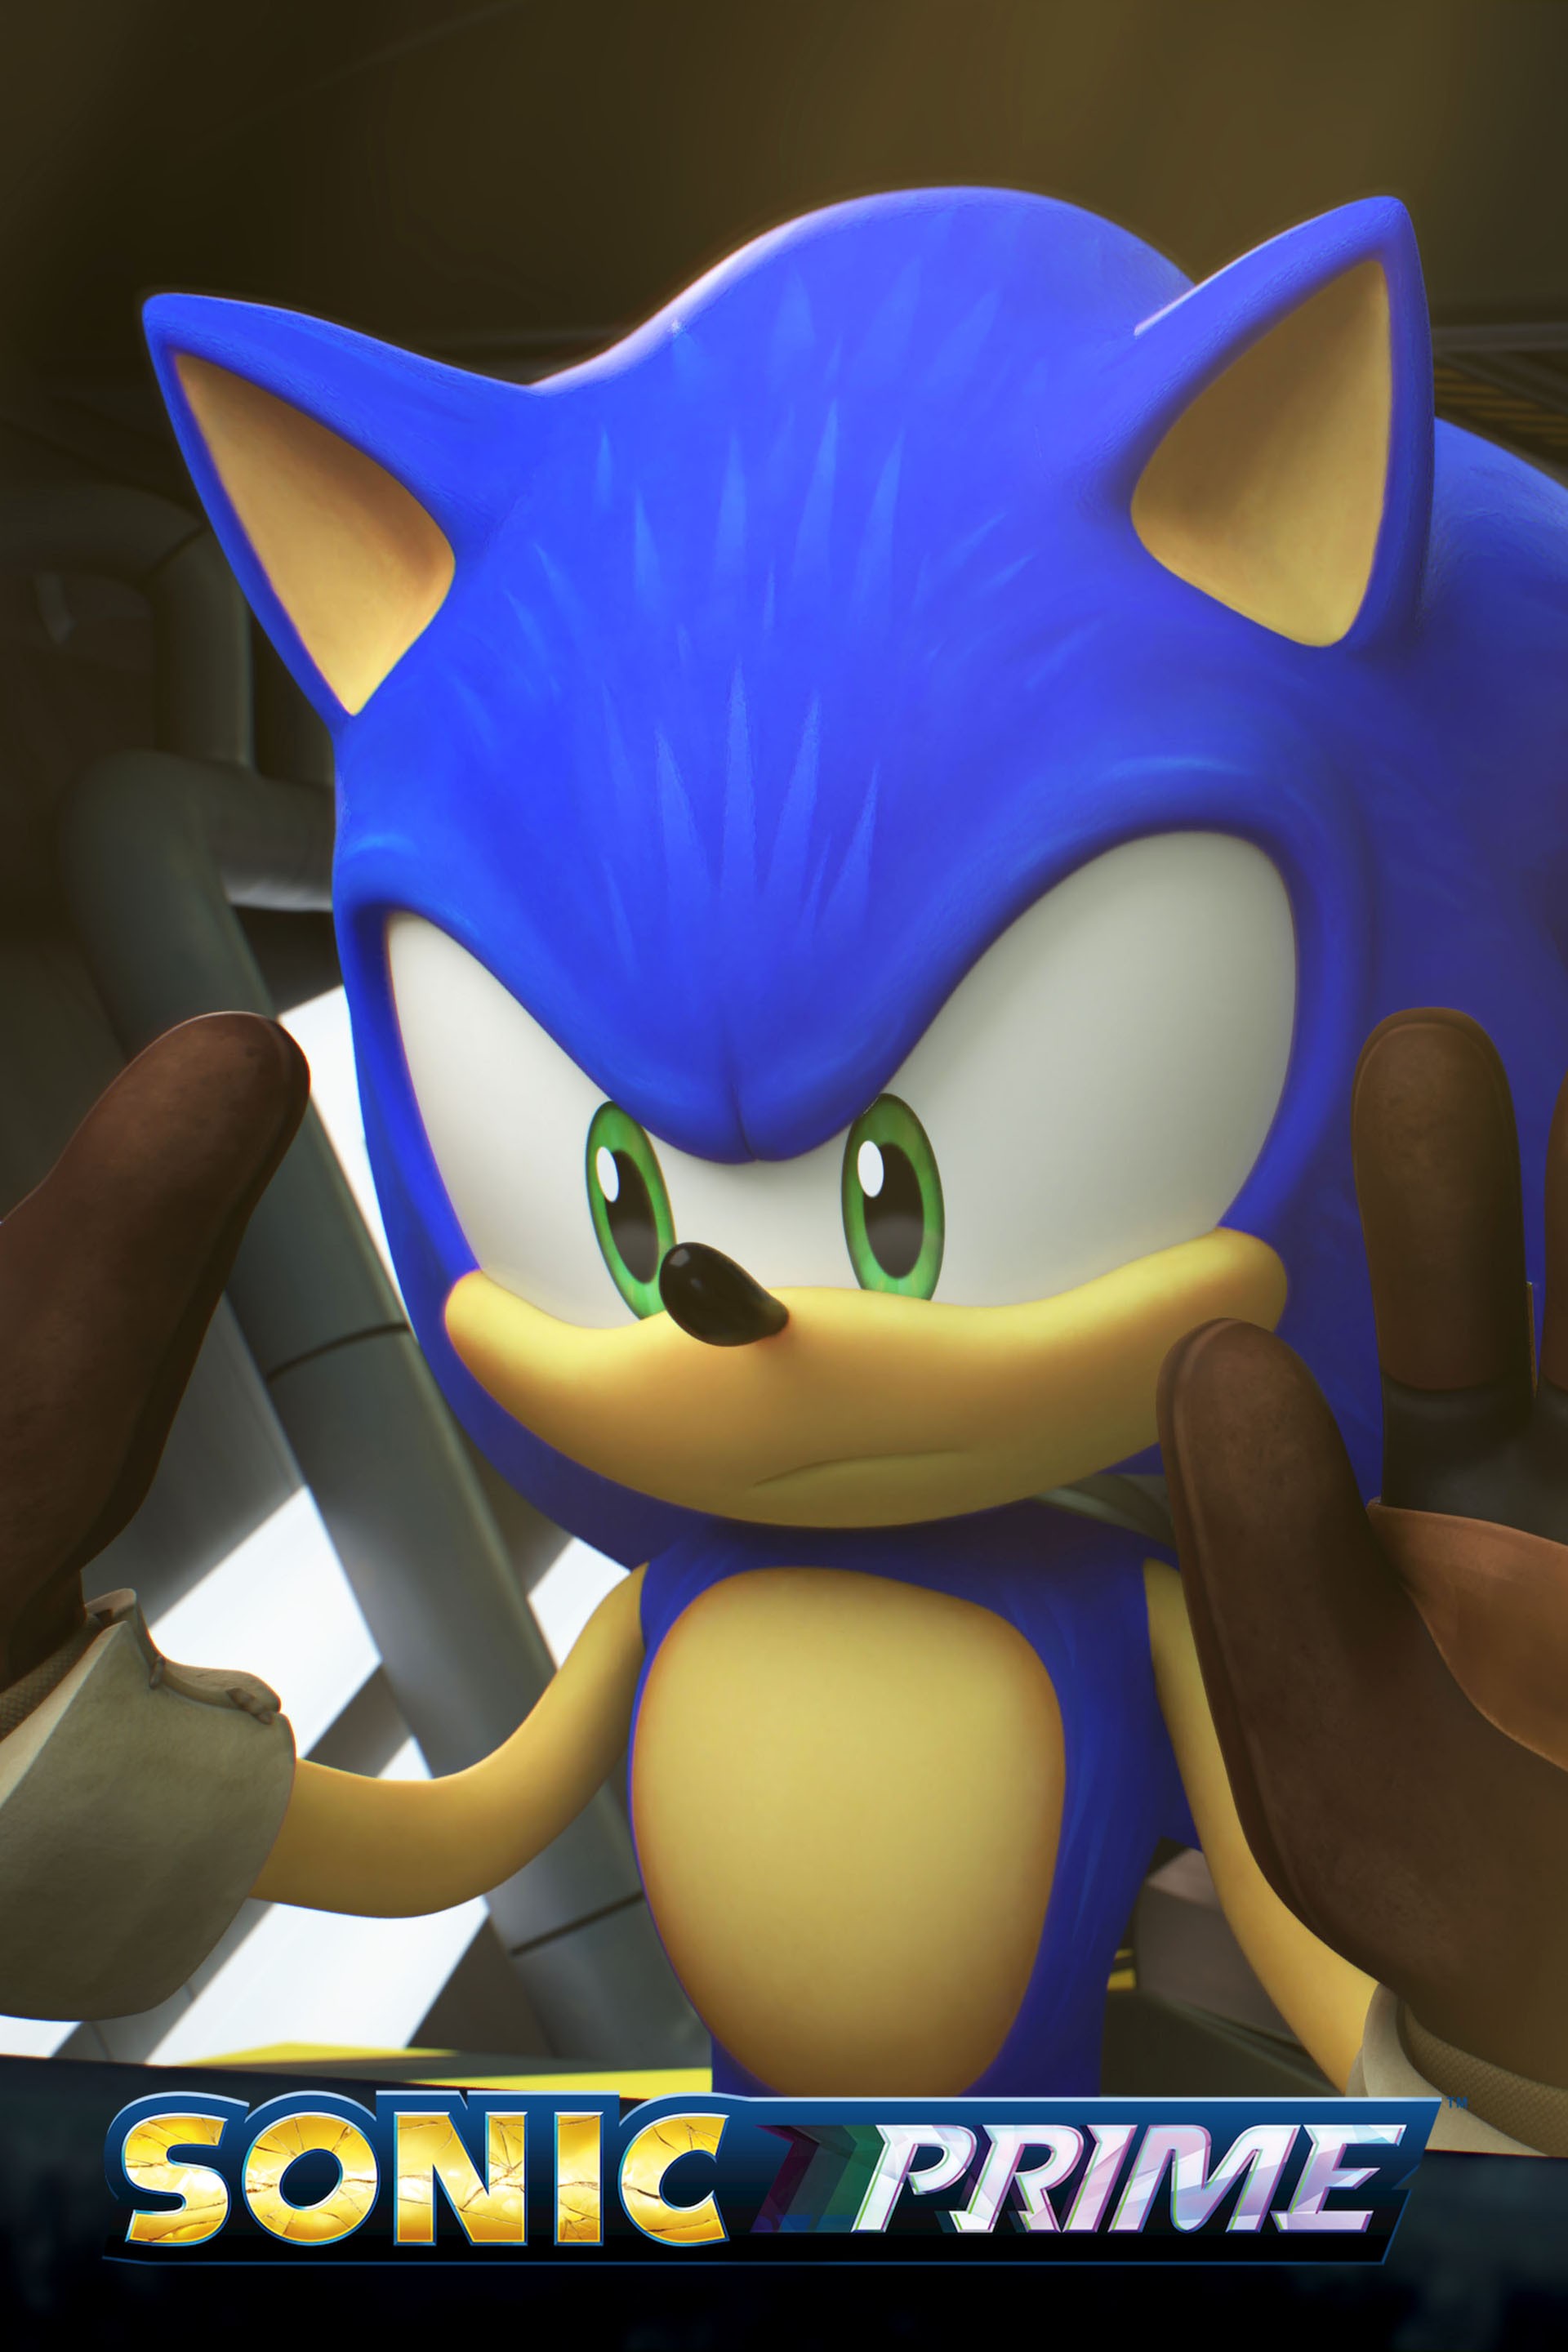 Sonic Prime Season 3 Potential Release Date, A New Teaser Update For The  Sonic Fans! - SCP Magazine